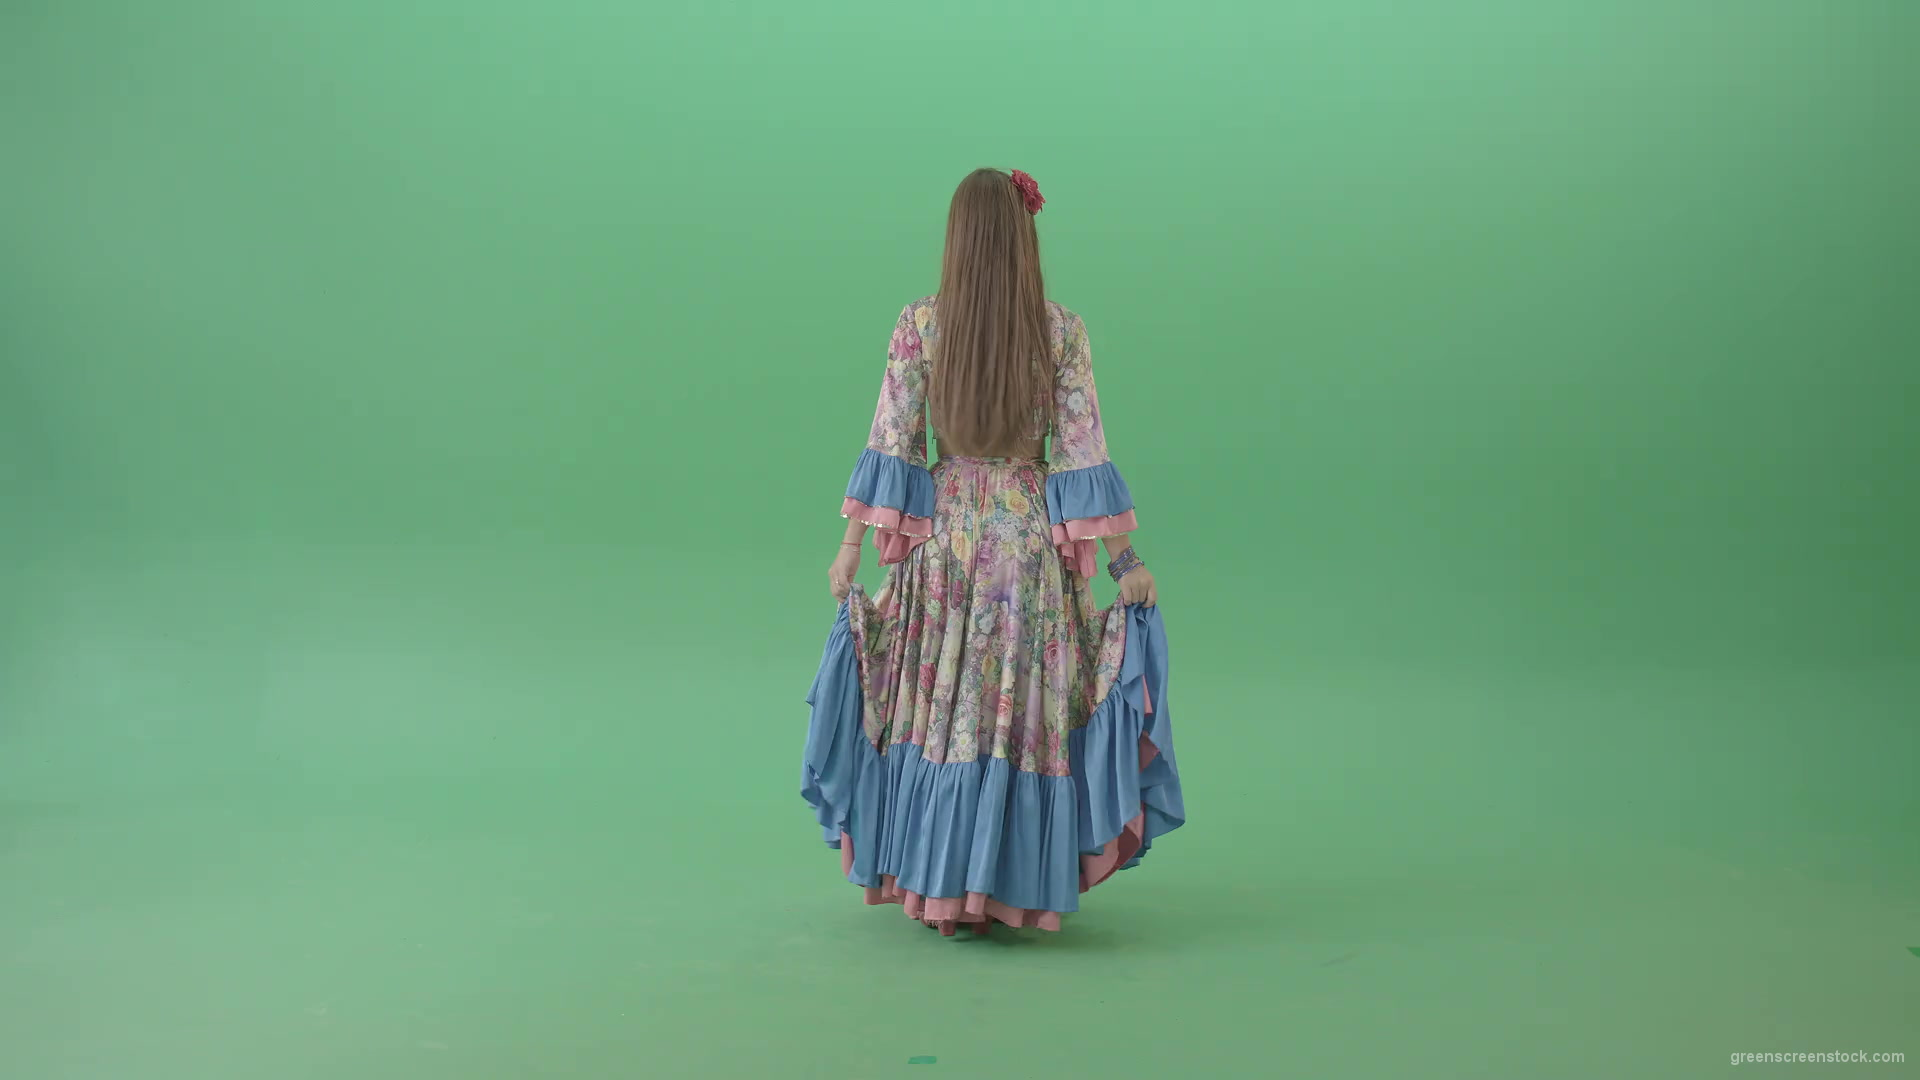 Dancing-gipsy-girl-waving-balkan-dress-from-back-view-isolated-on-green-screen-4K-Video-Stock-Footage-1920_001 Green Screen Stock